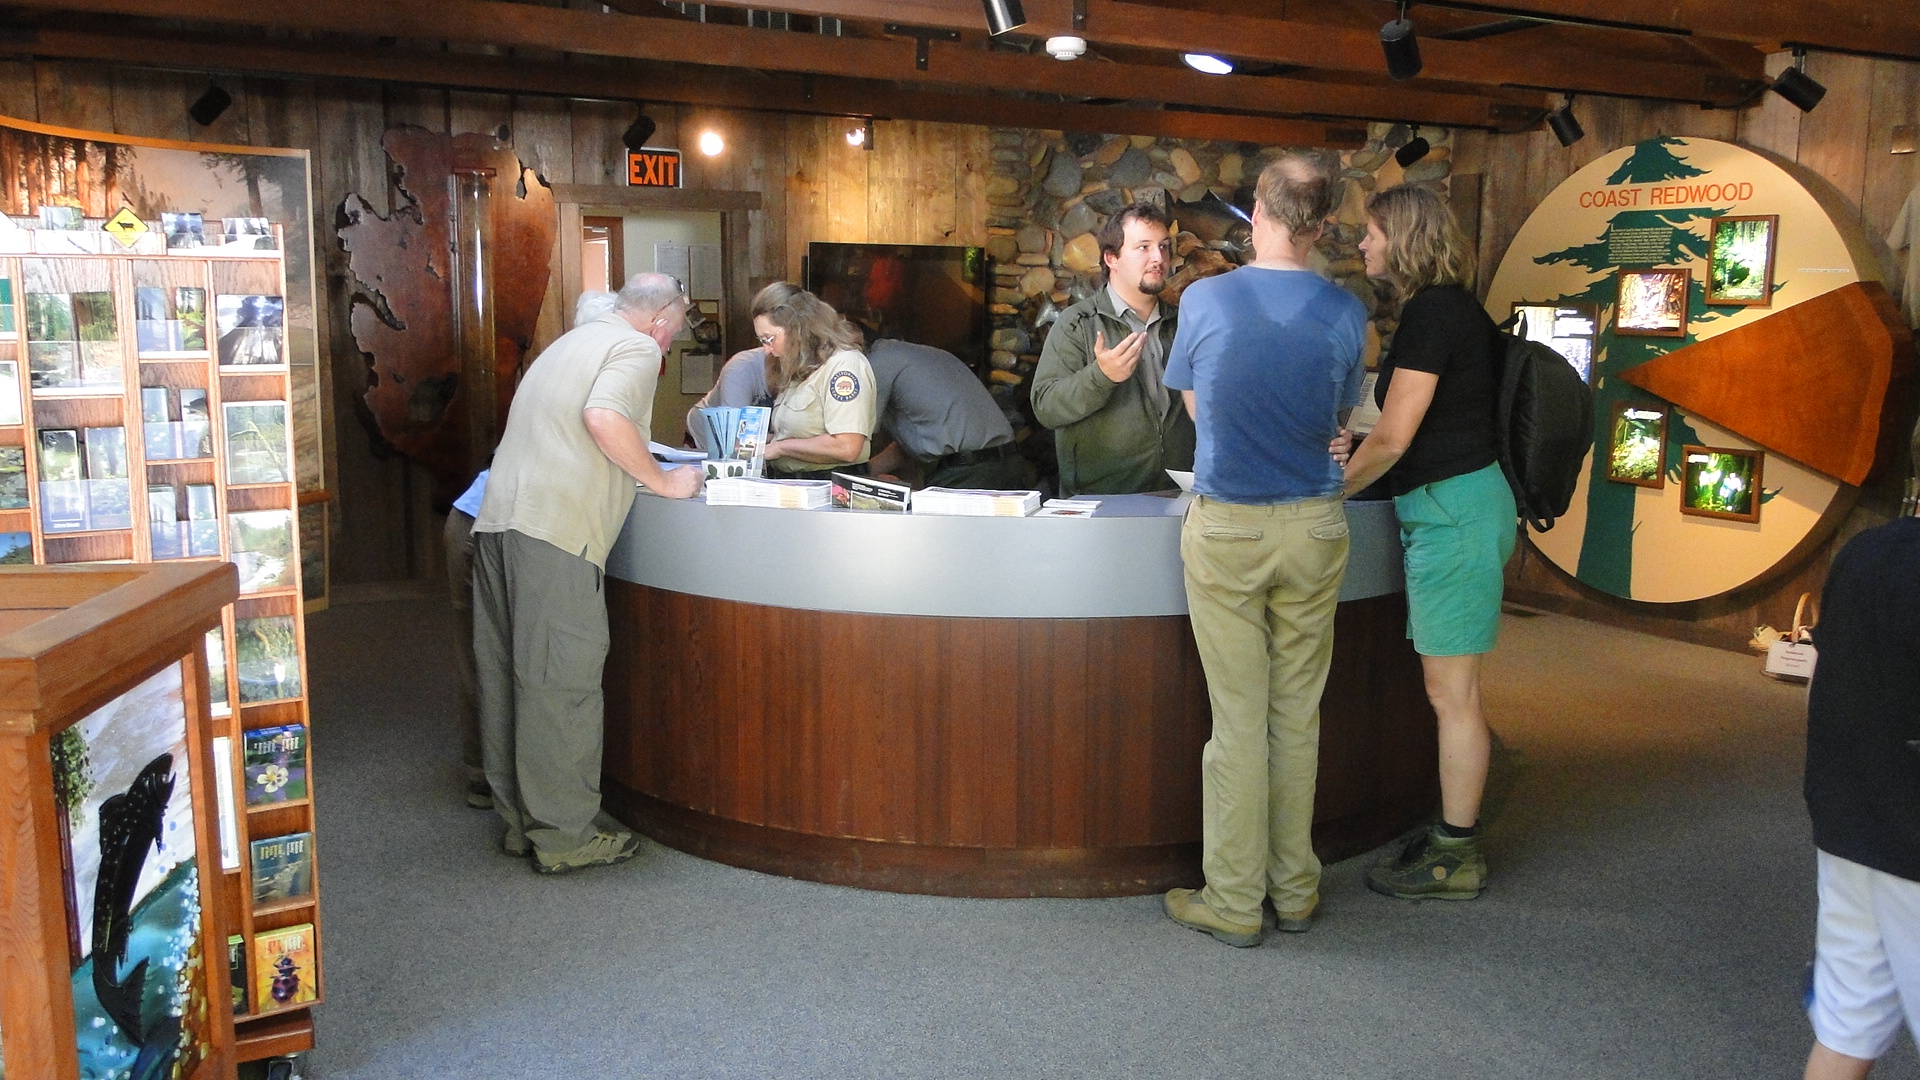 Rangers and volunteers staff a visitor center front desk.